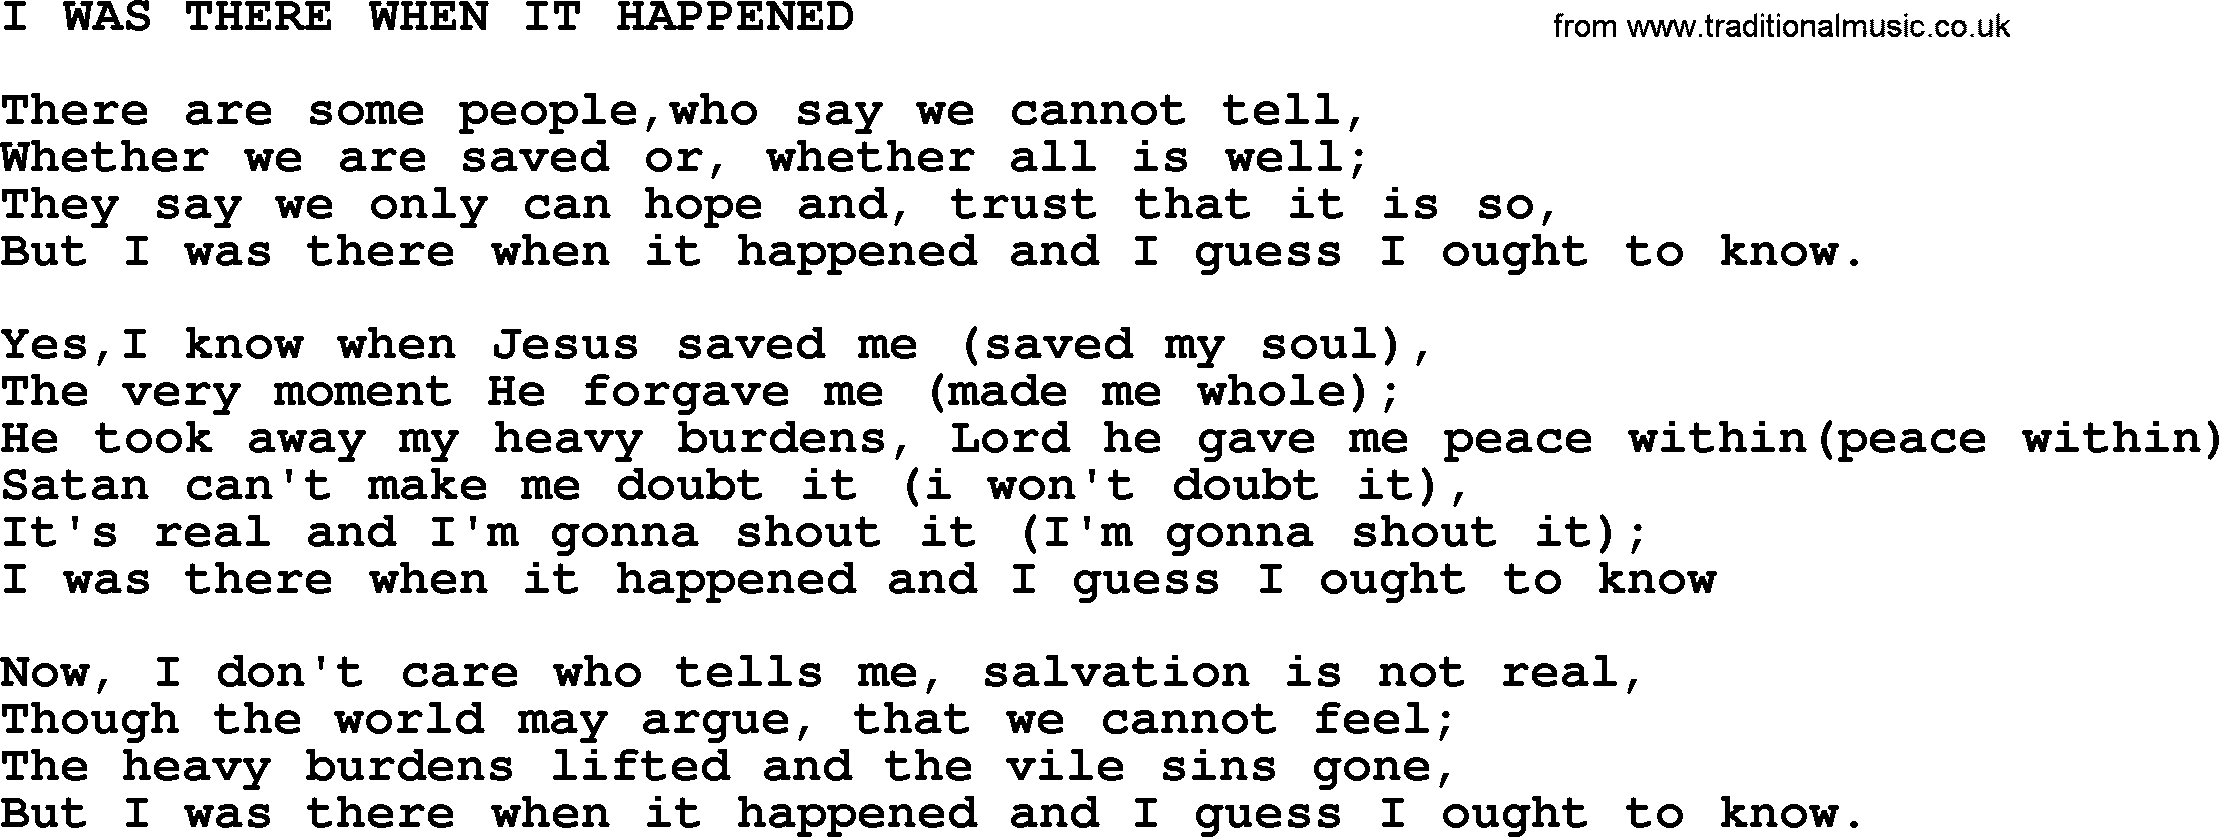 Johnny Cash song I Was There When It Happened.txt lyrics